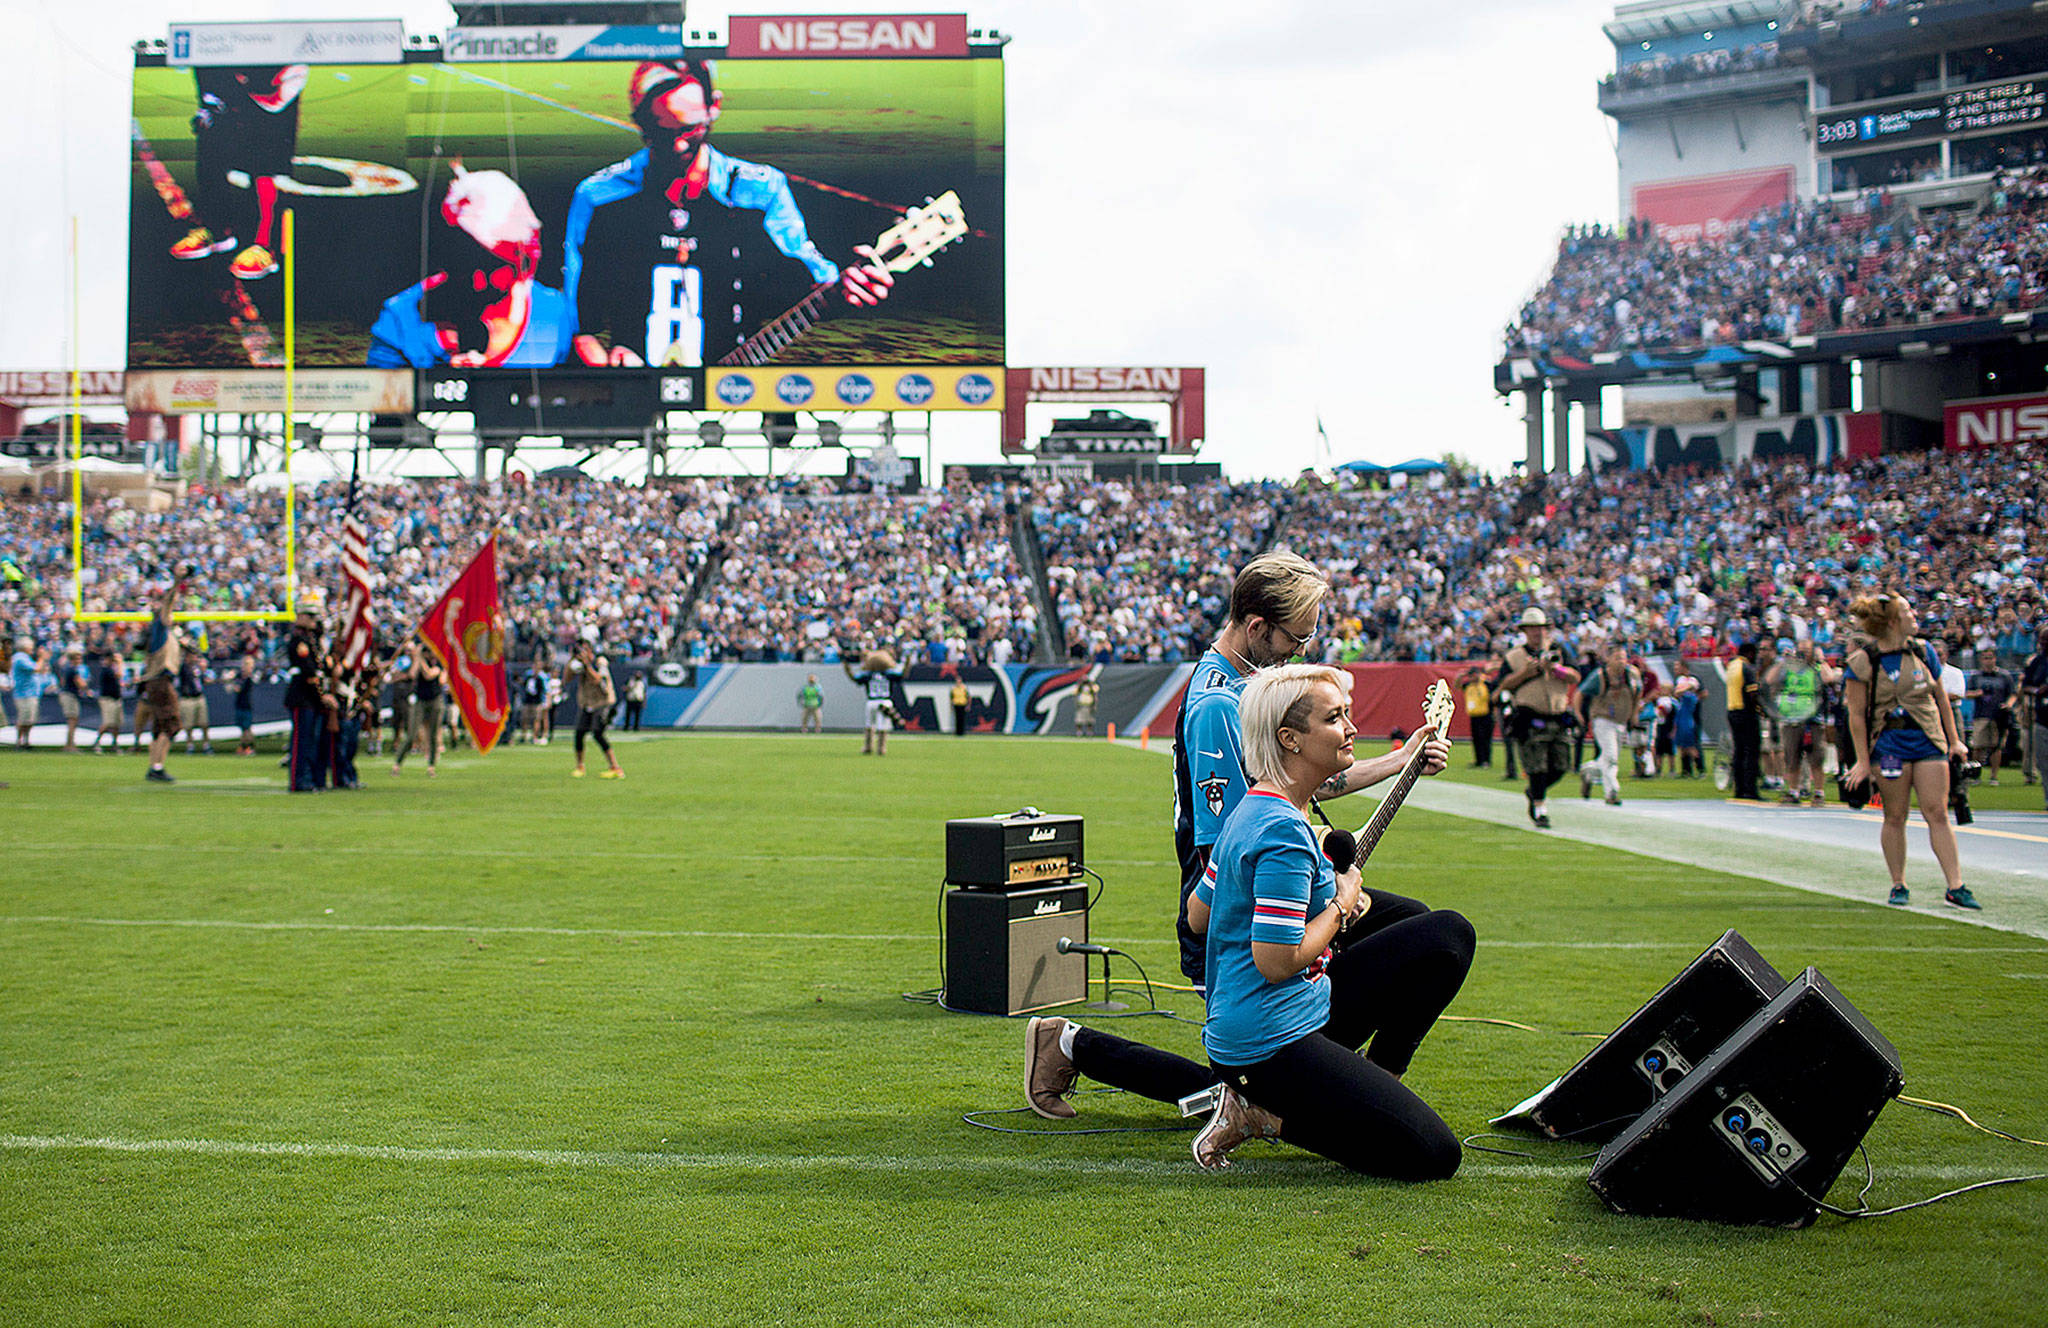 Singer Meghan Lindsey takes a knee at the end of her performance of the Star Spangled Banner before the game Sunday between the Seattle Seahawks and the Tennessee Titans in Nashville. (Austin Anthony/Daily News via AP)